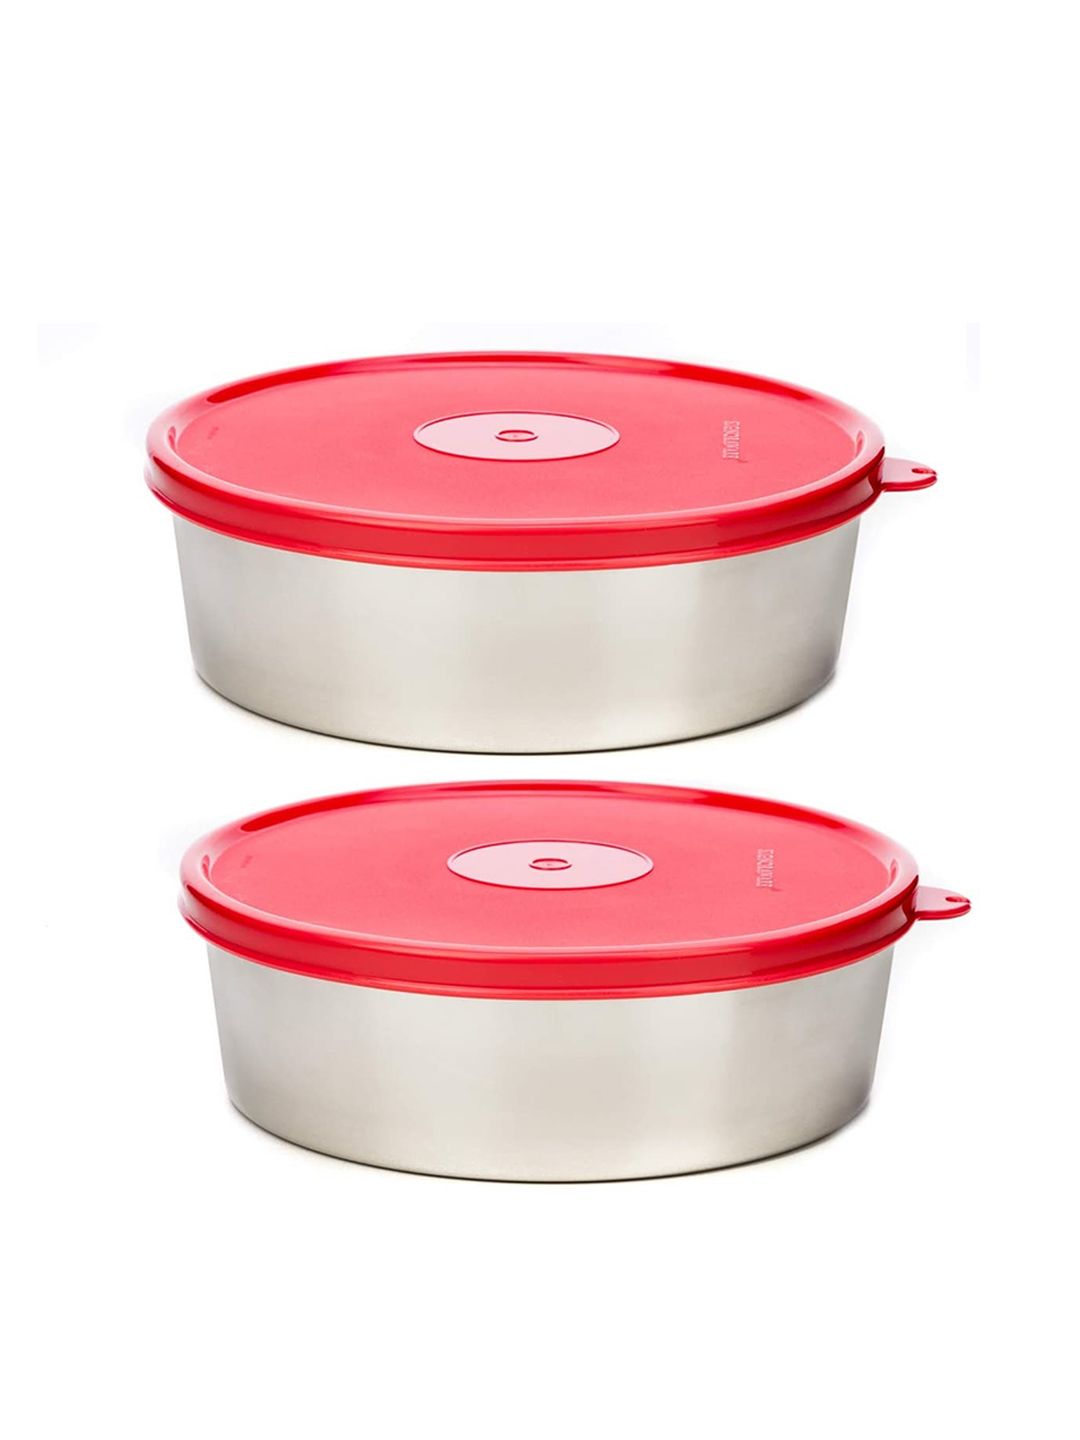 SignoraWare Set Of 2 Red Solid Food Container With Lid Price in India